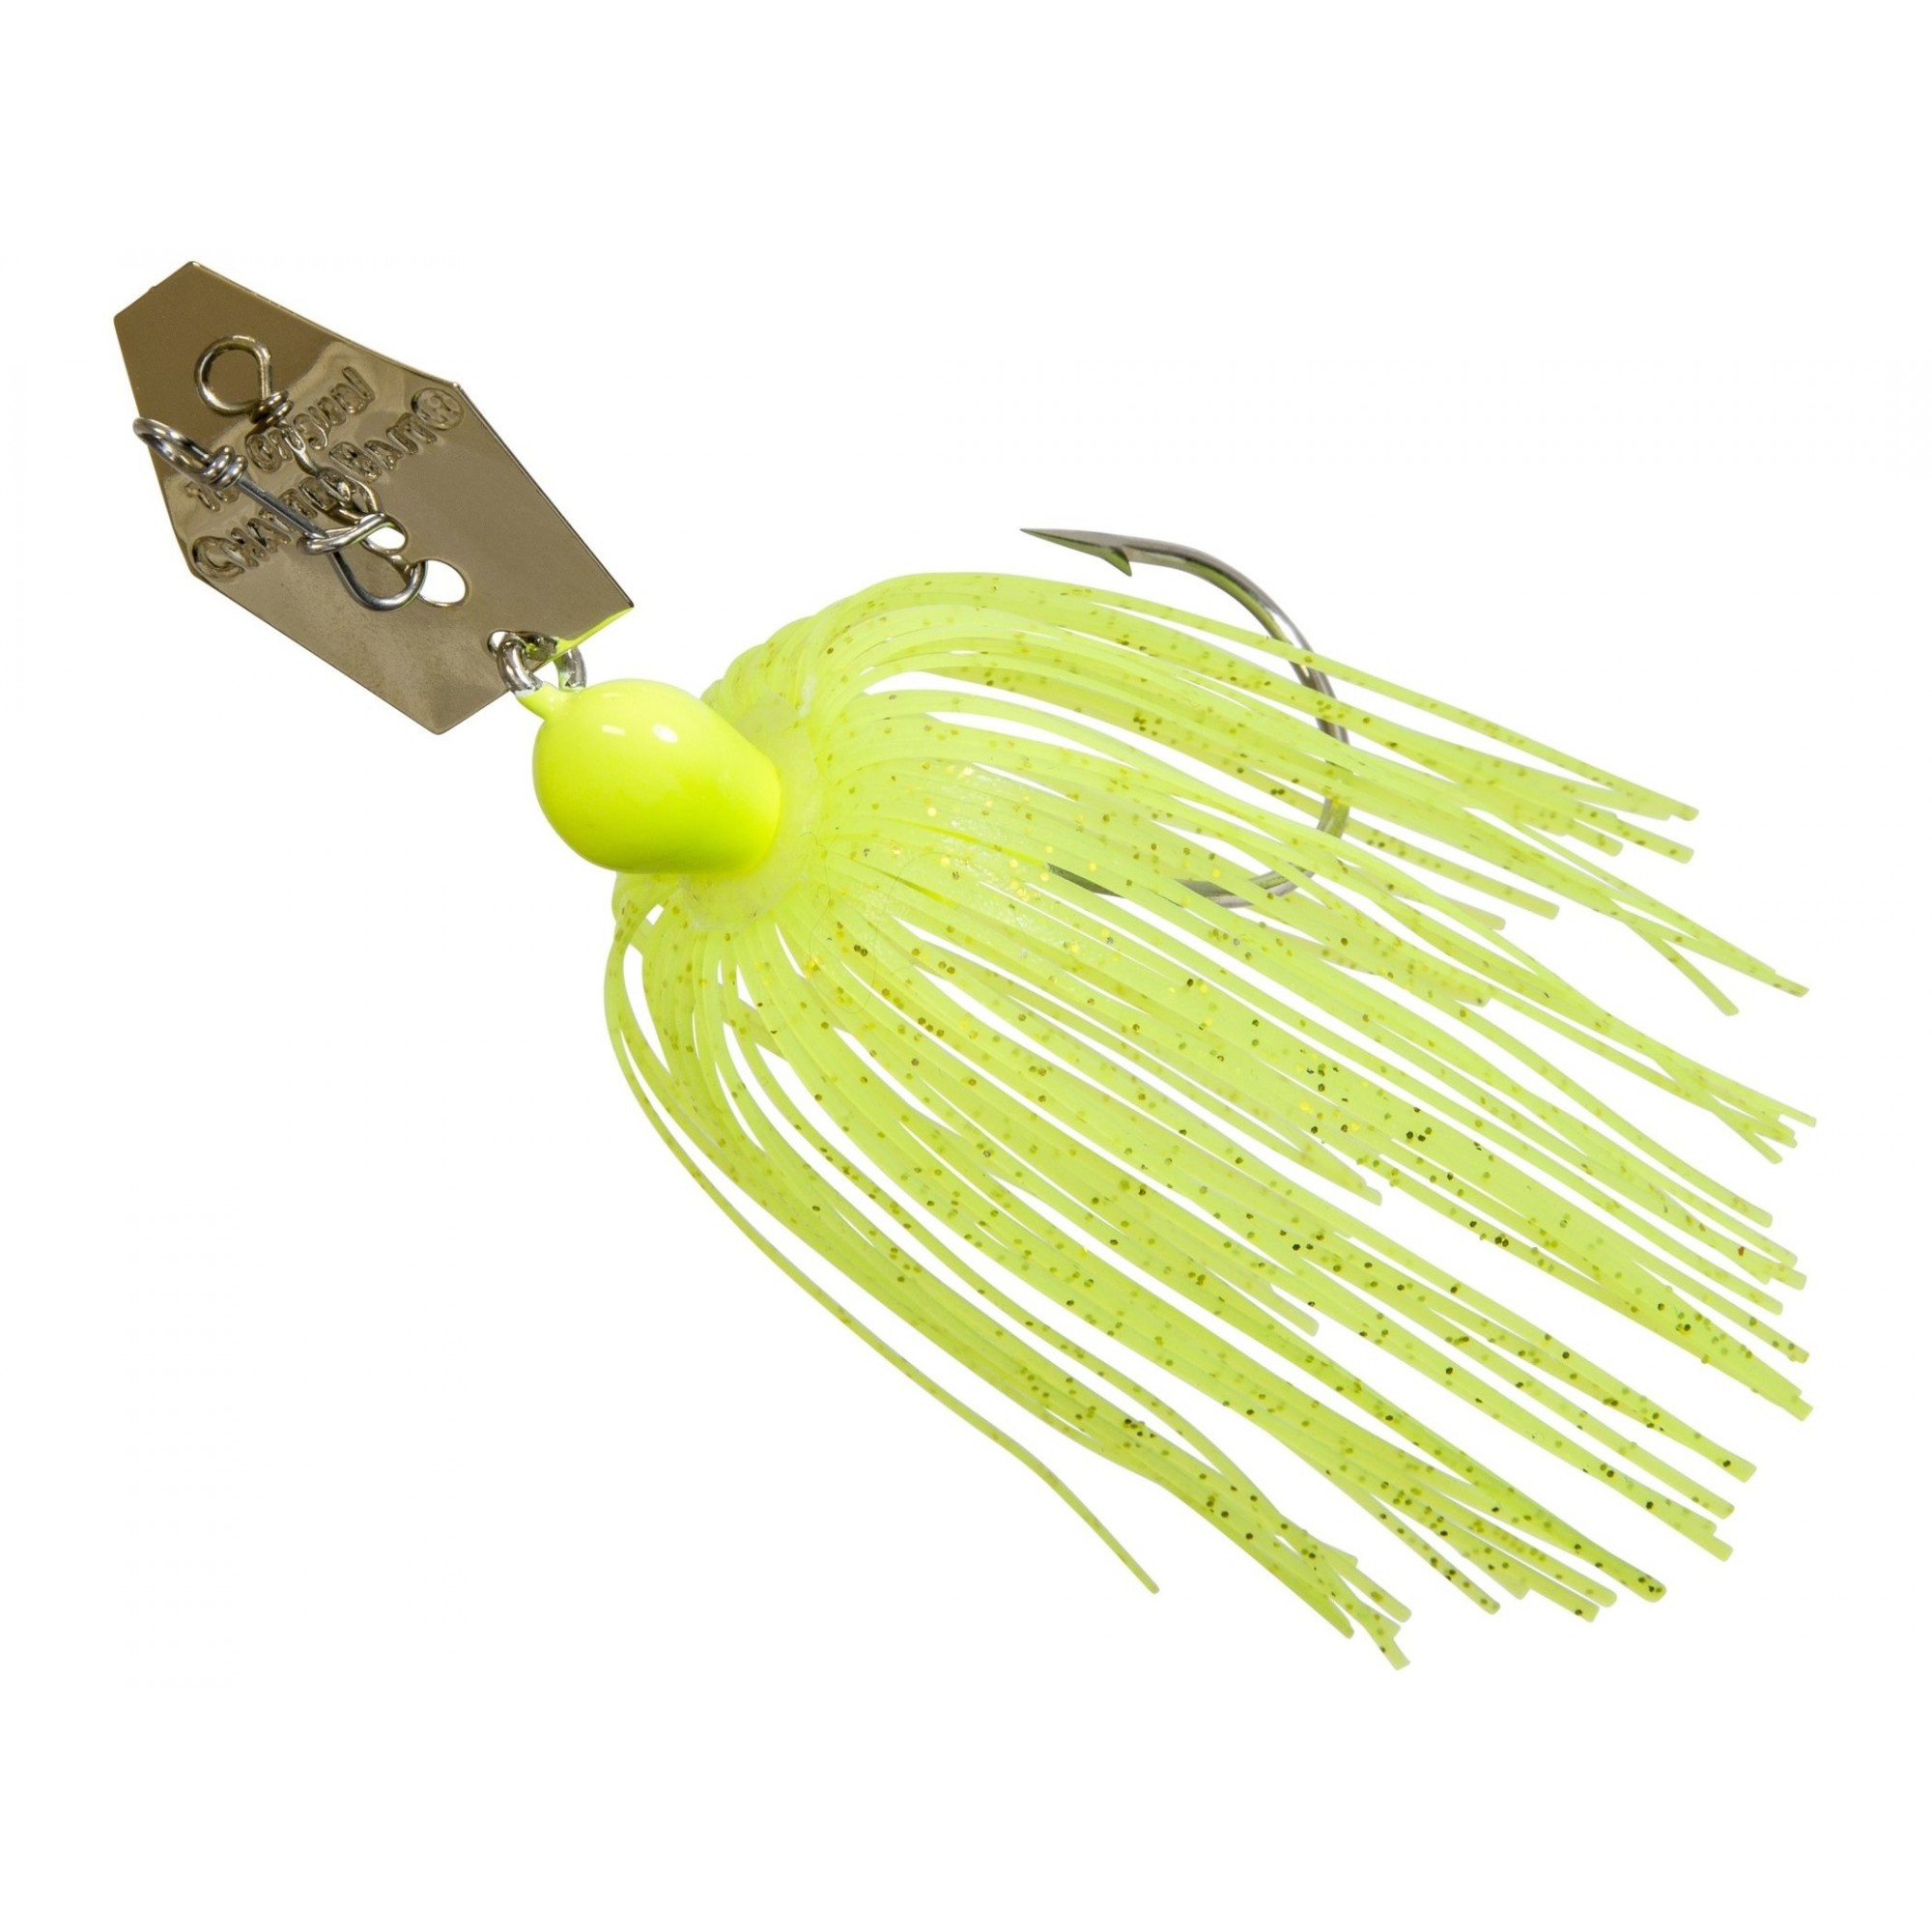 Esche-metalliche-chatterbait-chatter-bladed-jig-z-man-the-original-chatterbait-75-chartreuse-lure-fishing-planet.